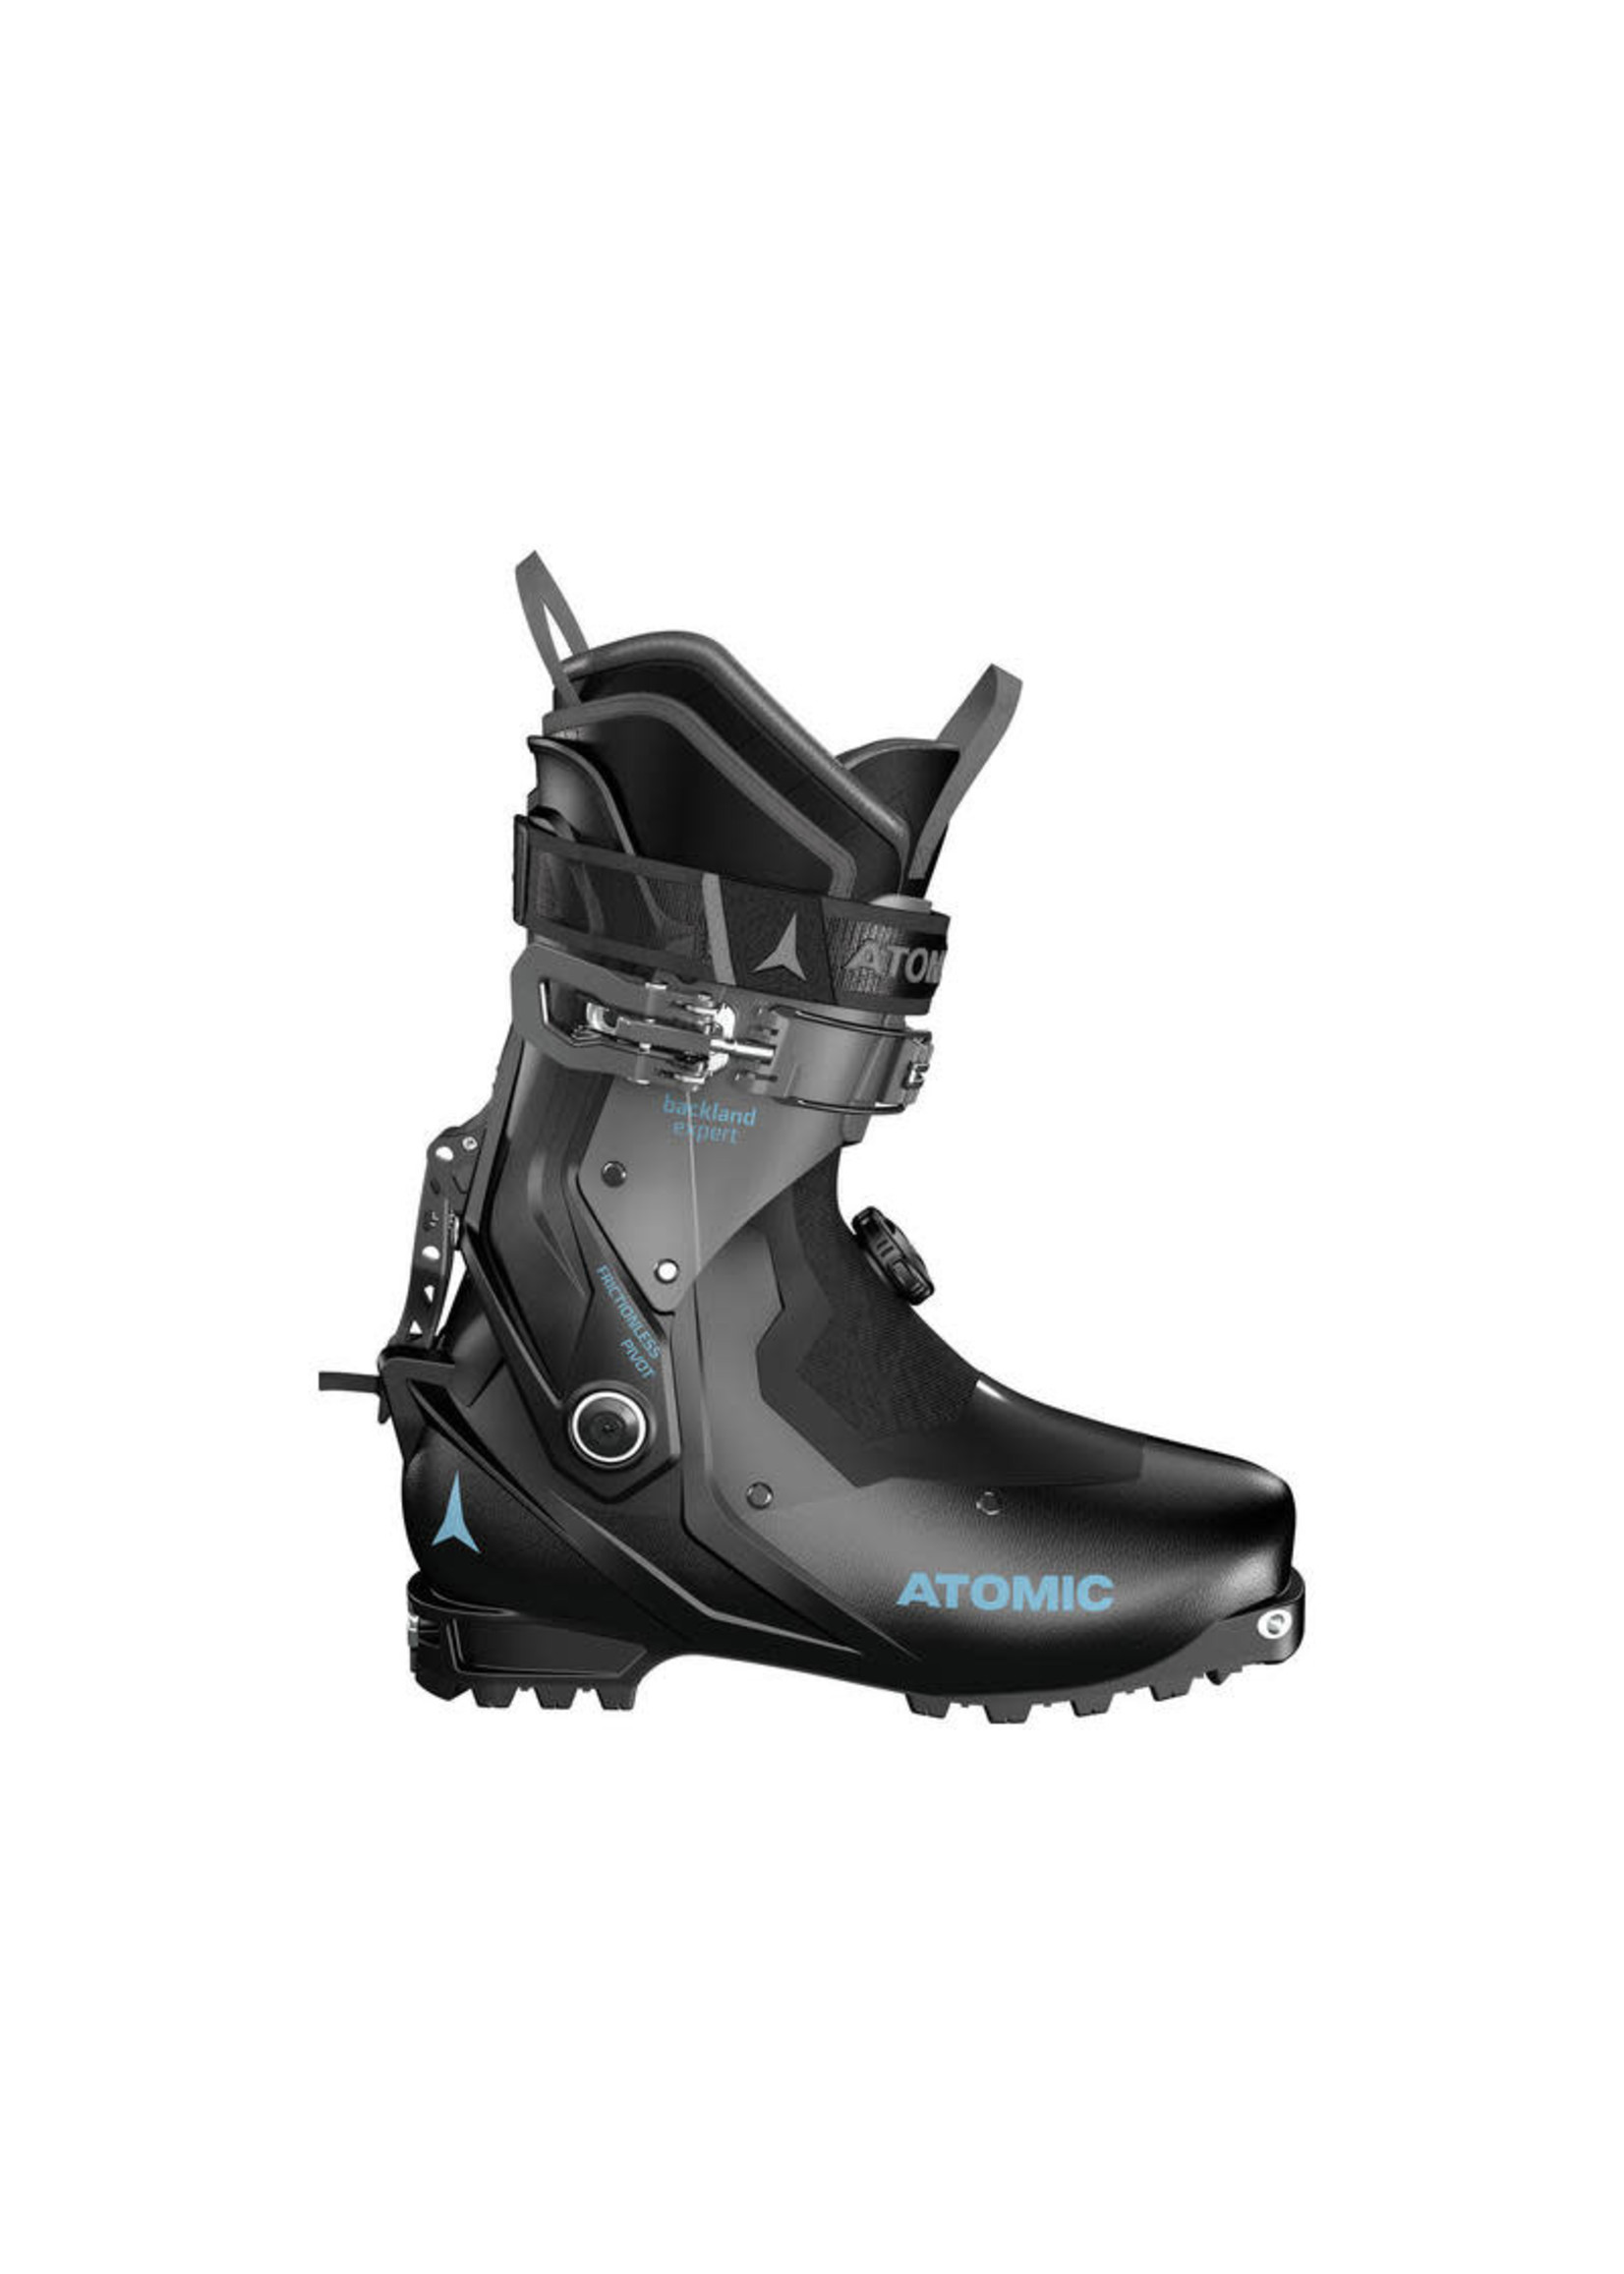 Atomic Touring Ski Boot Backland Exp BLK/GRY 24